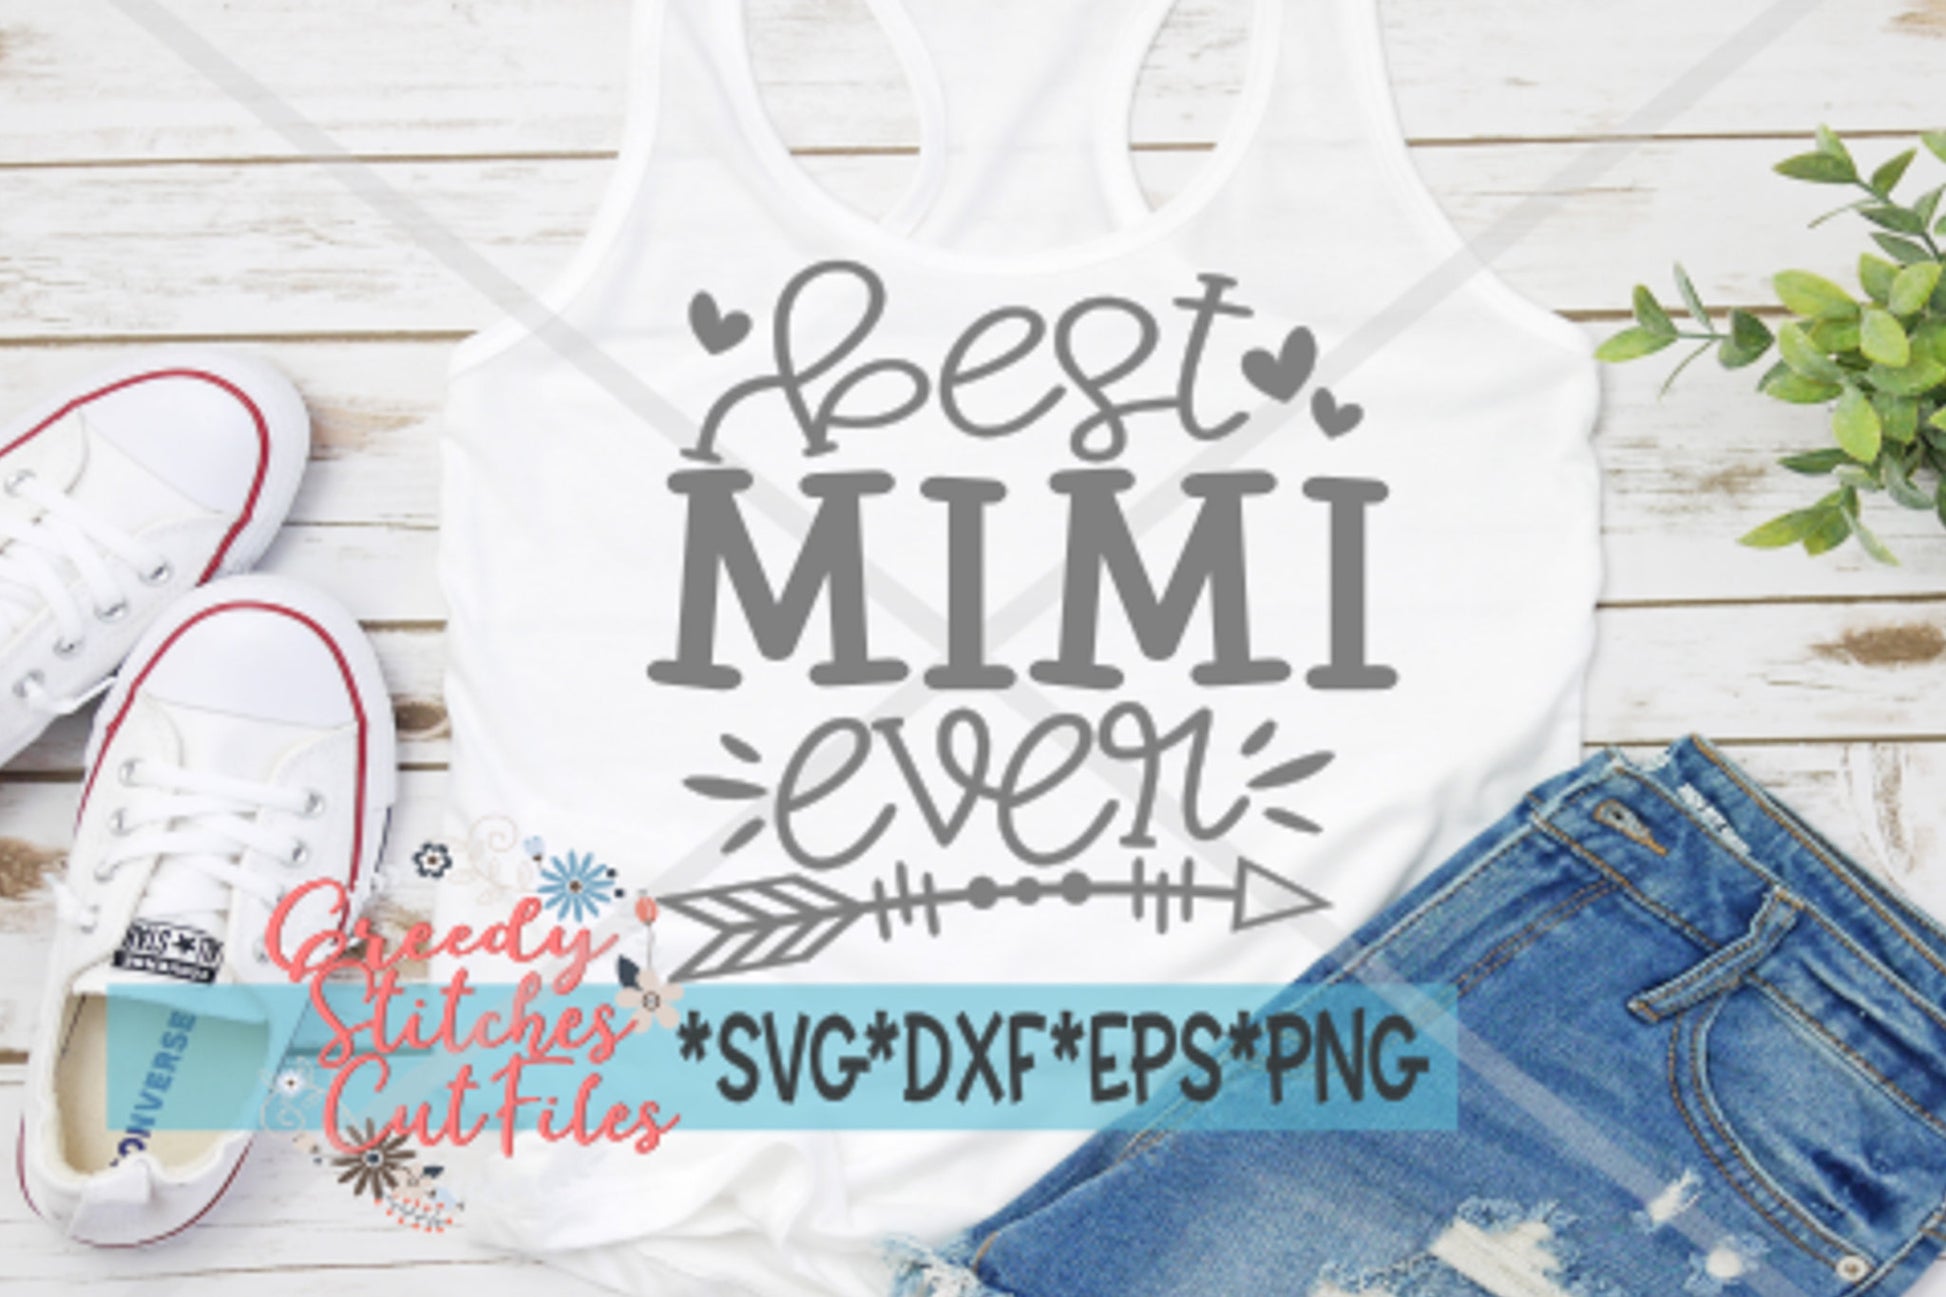 Best Mimi Ever SvG | Mother&#39;s Day SVG | Mother&#39;s Day | Mimi SvG | Mimi EpS | Best Mimi Ever svg, dxf, eps, png. Instant Download Cut File.